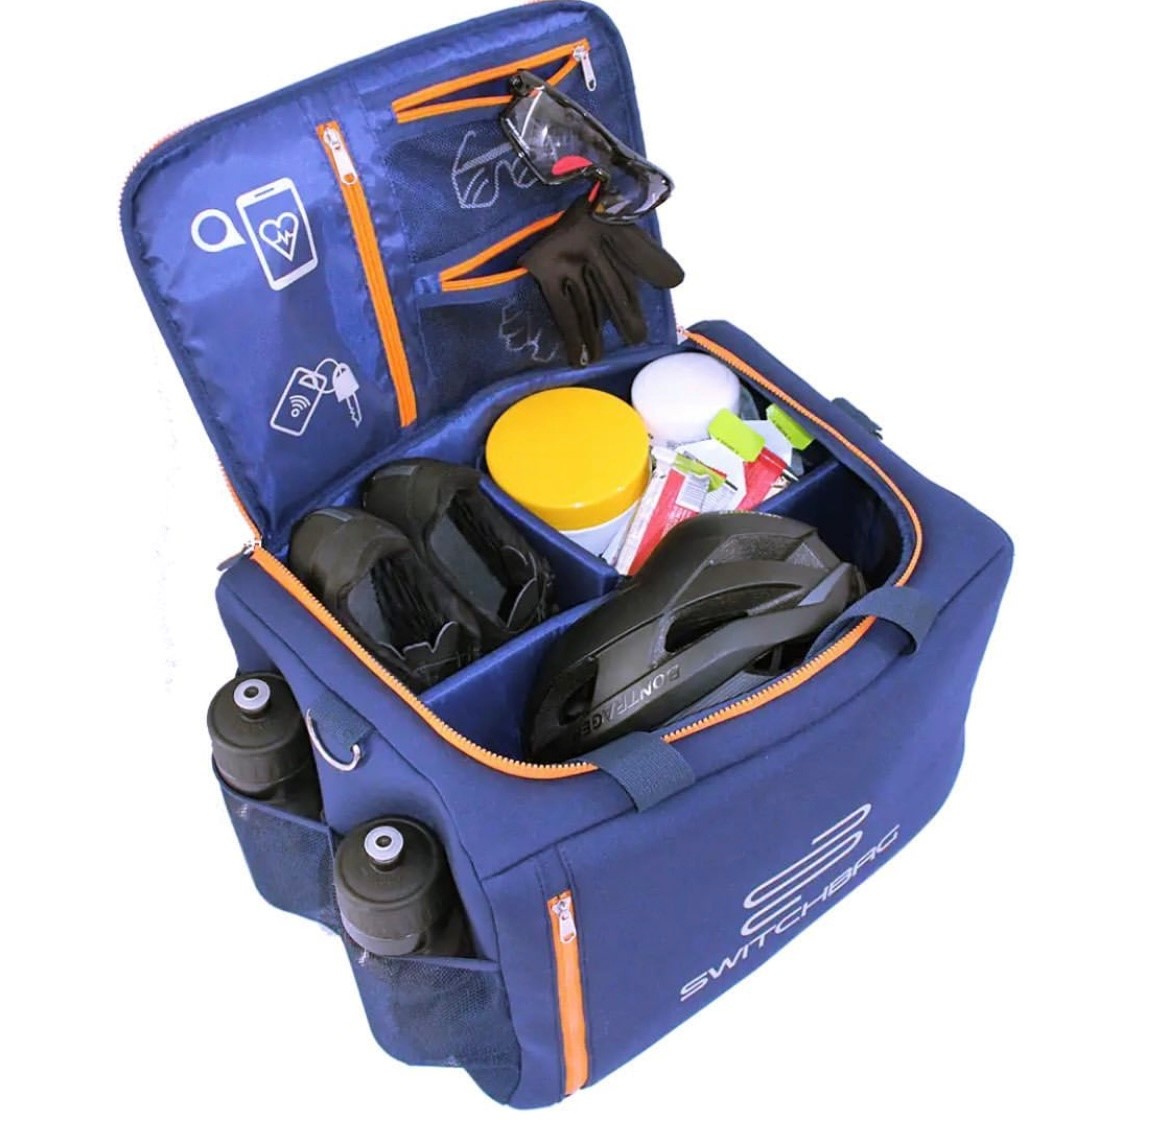 Switchbag Multi-Functional Neoprene Cycling Bag with Kit Storage Compartments